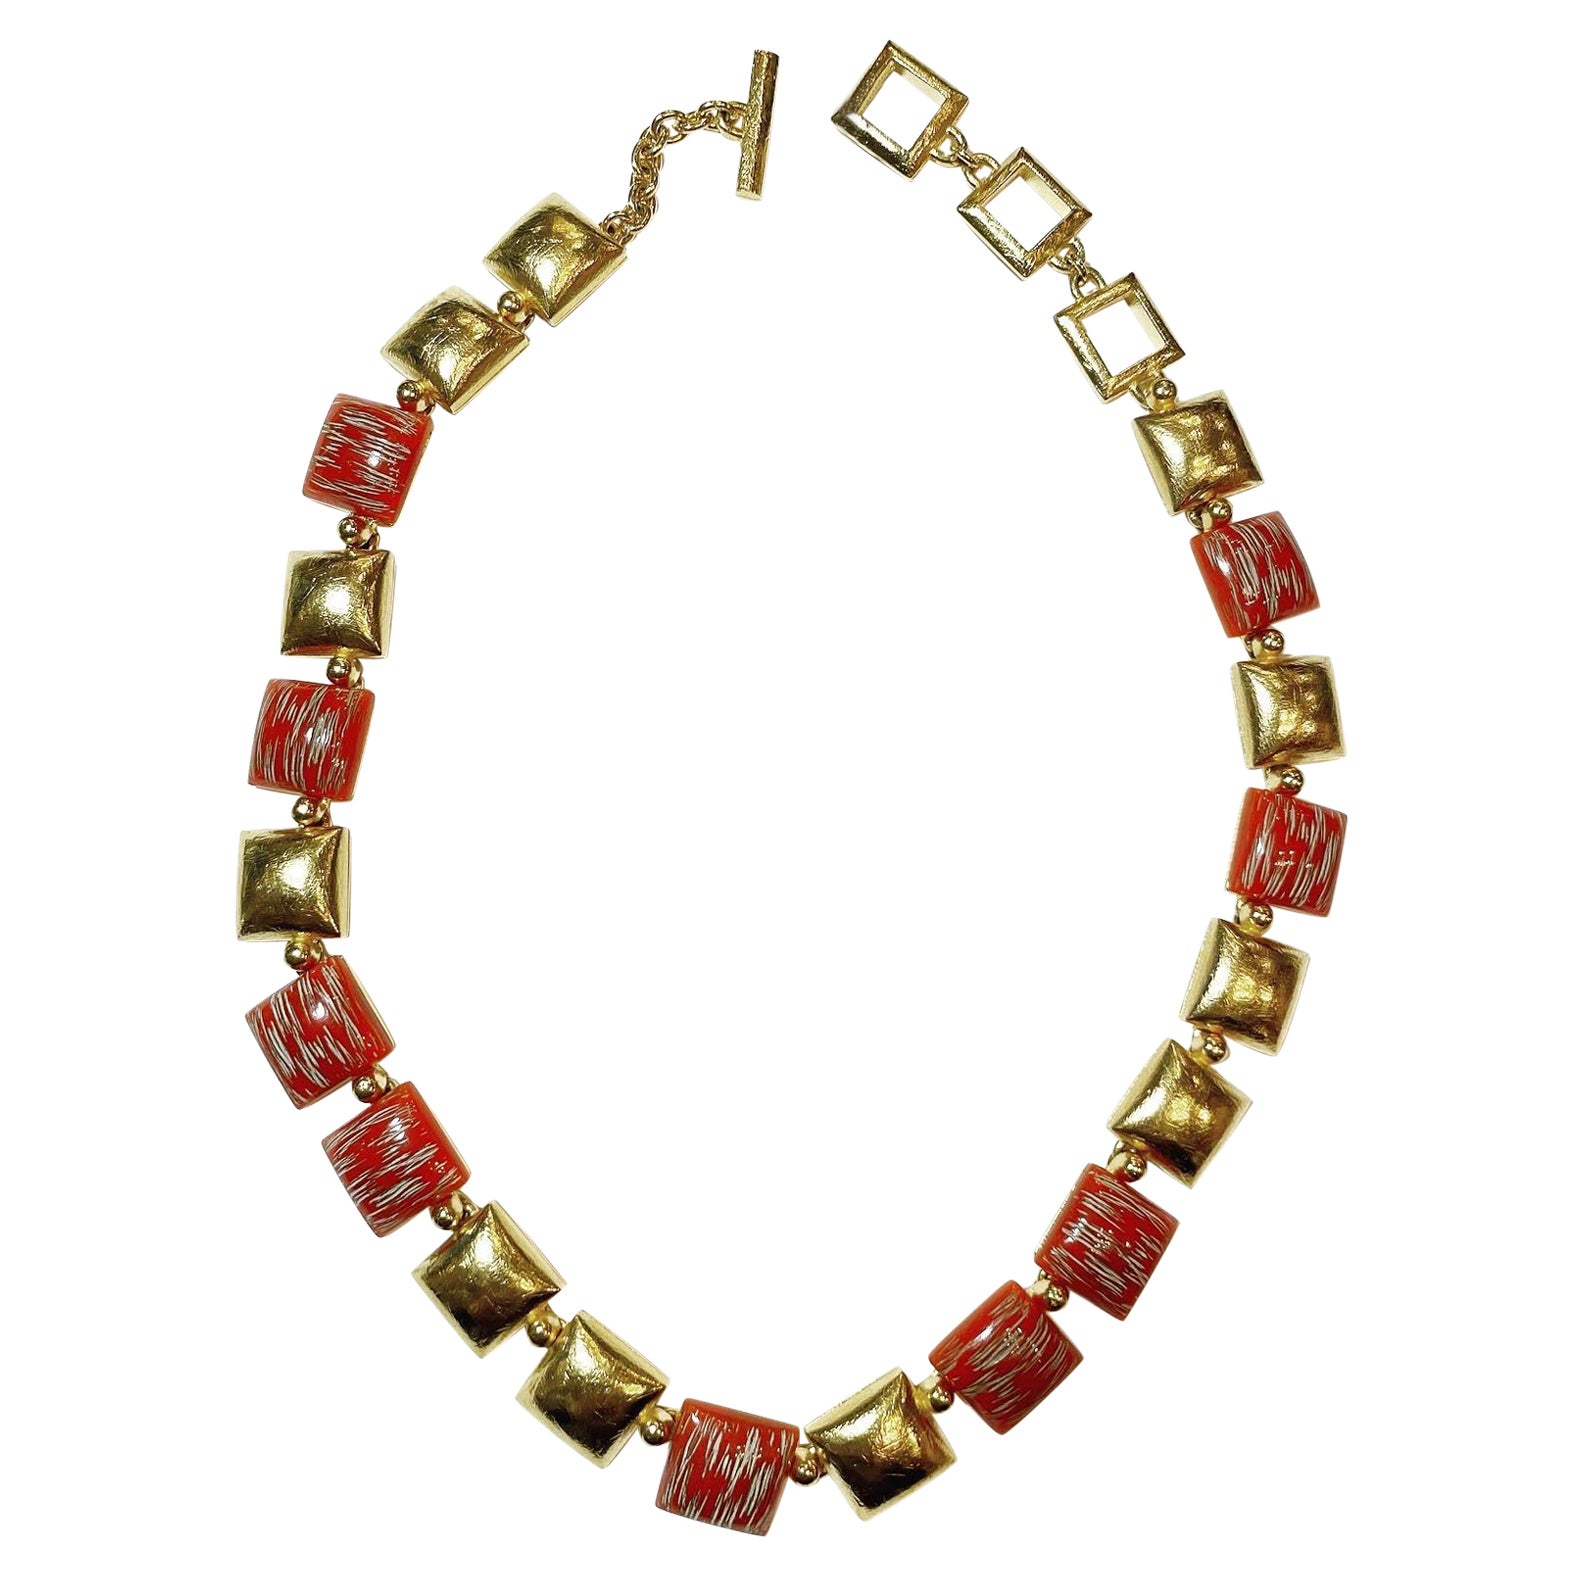 1980s YSL Yves Saint Laurent Vintage Gilt and Resin Fashion Never Used Necklace